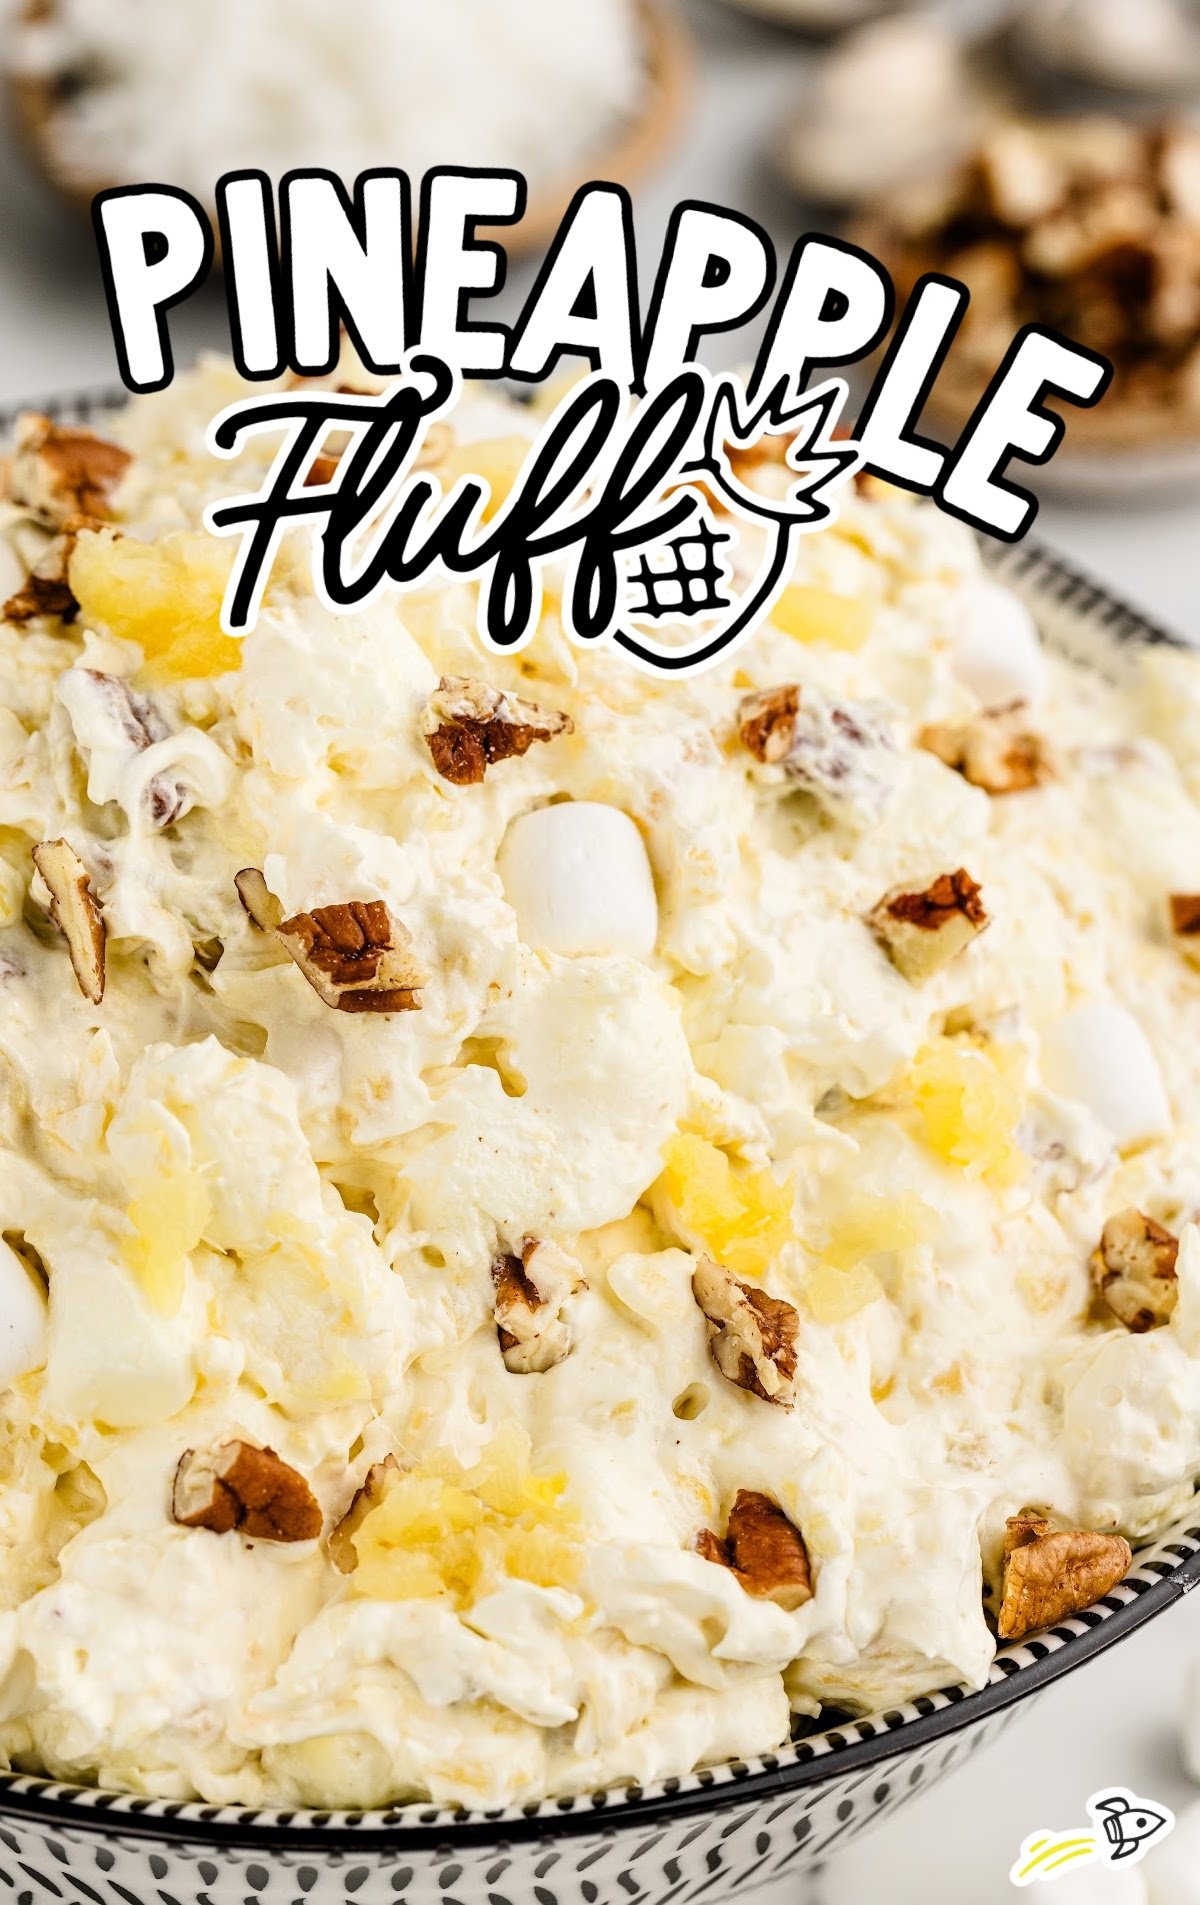 pineapple fluff dessert with nuts, pudding, cool whip, and marshmallows in a bowl ready to serve